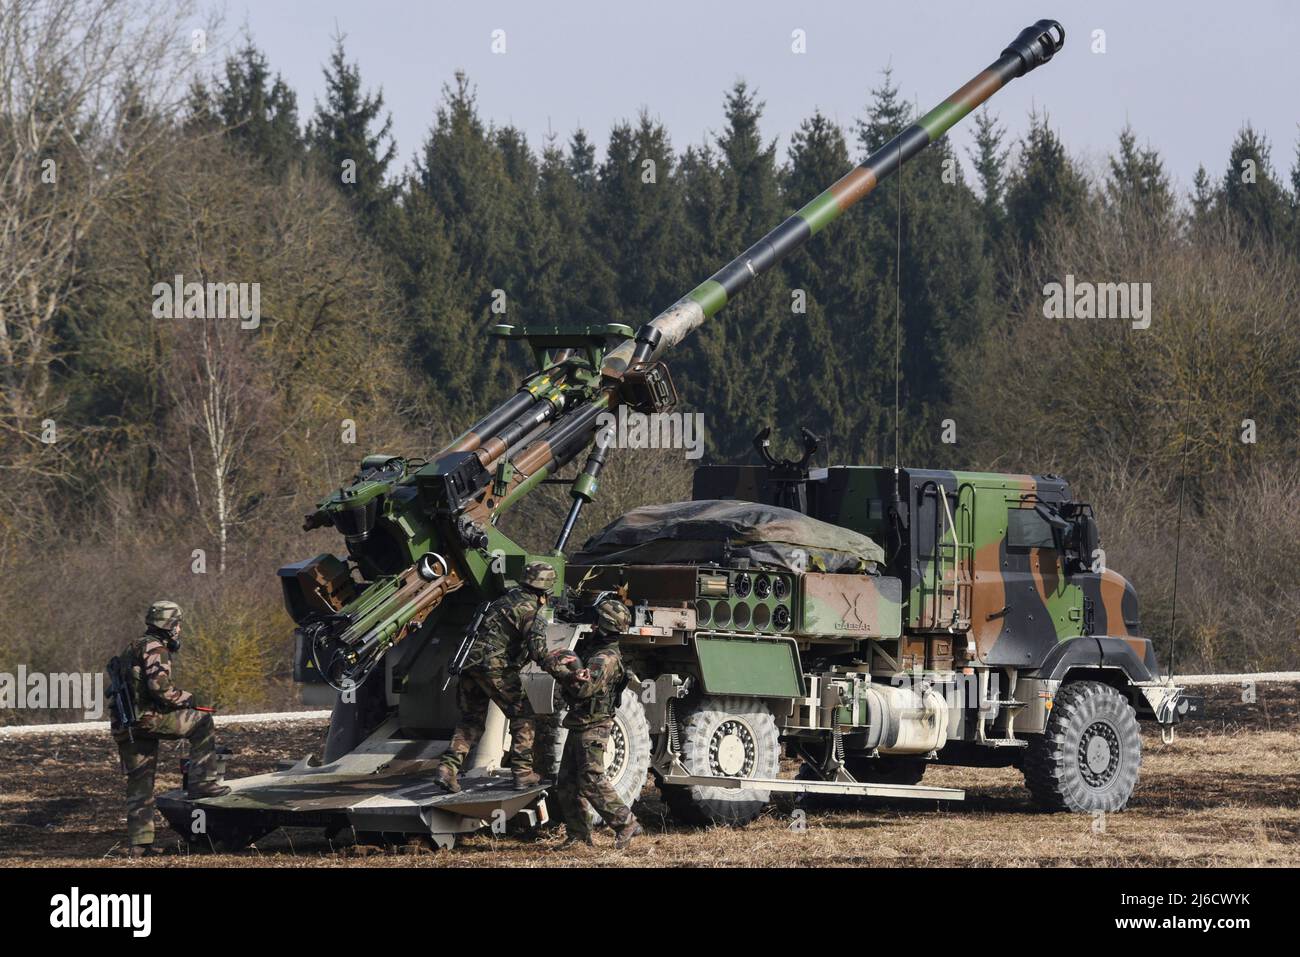 Grafenwoehr, Germany. 05 March, 2018. French Army artillerymen during a live fire mission with the Caesar self-propelled howitzer during exercise Dynamic Front at the Grafenwoehr training area, March 5, 2018 in Grafenwoehr, Germany.  Credit: Markus Rauchenberger/US Army Photo/Alamy Live News Stock Photo